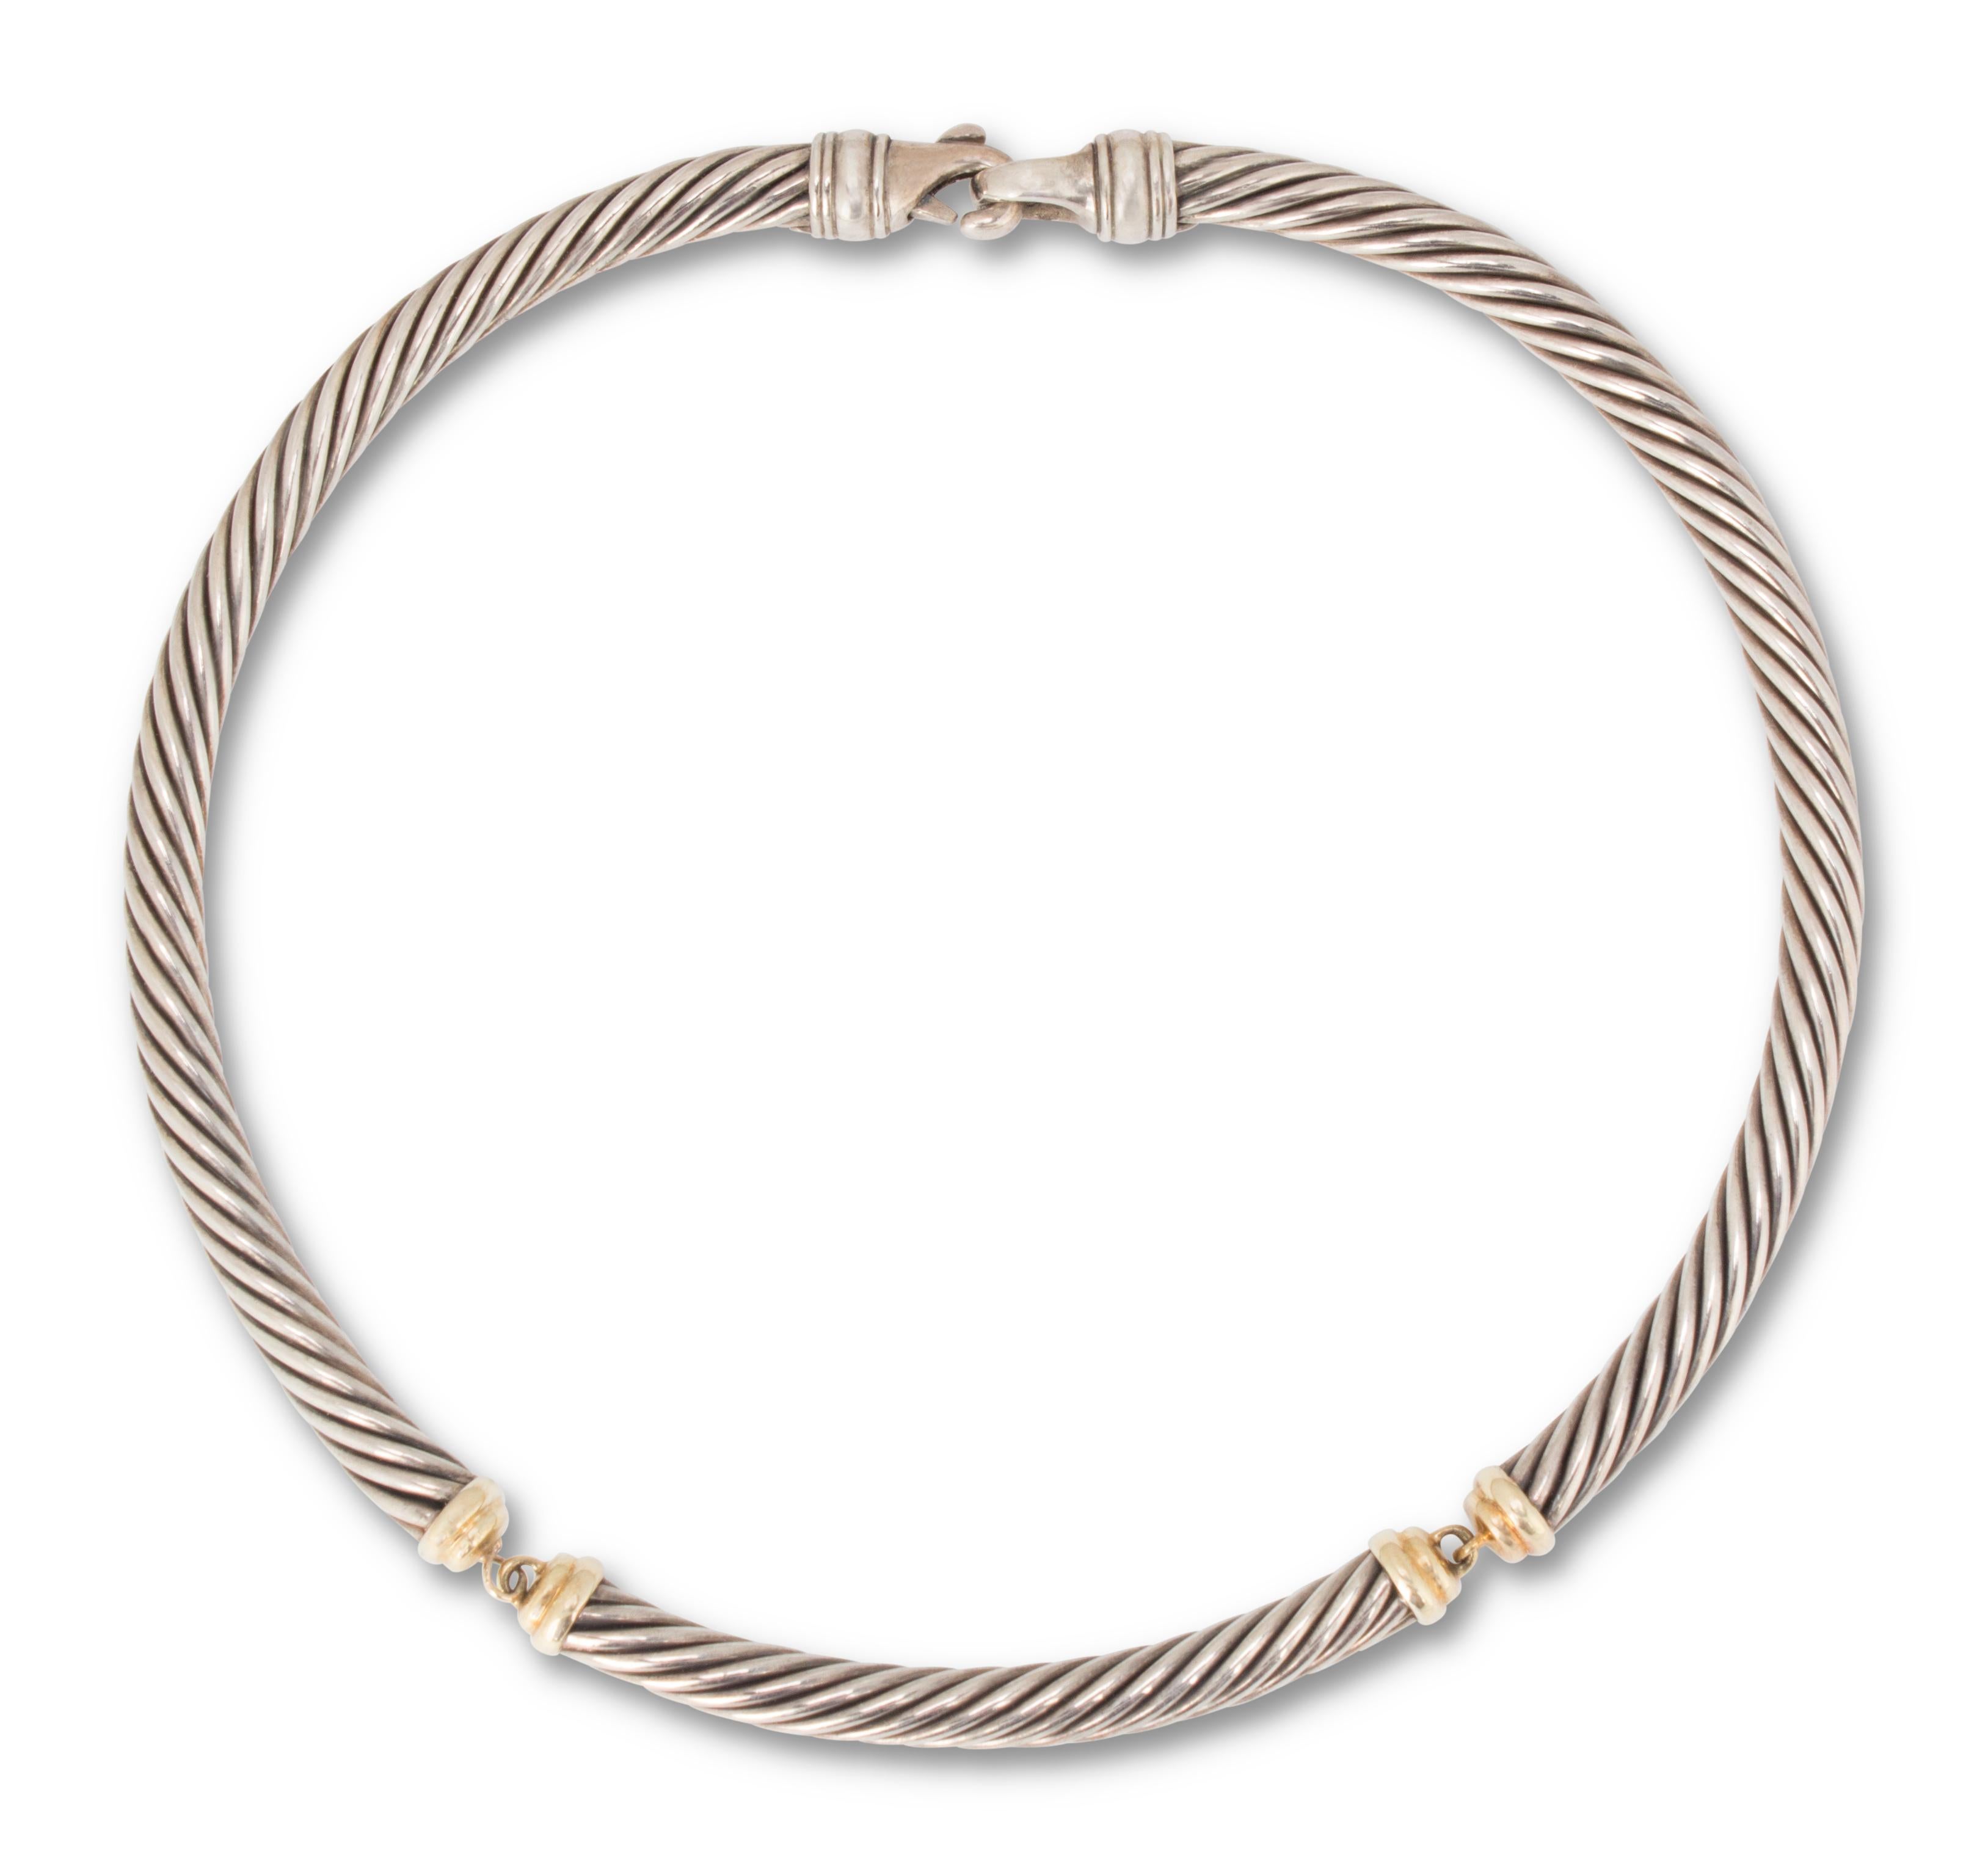 Authentic David Yurman 6mm cable necklace crafted in sterling silver, 14 karat yellow gold and 18 karat yellow gold.  Features Yurman's classic cable design made in 3 links.  5 1/2 inch diameter.  Signed DY, 925, 585, 750.  CIRCA 2000s